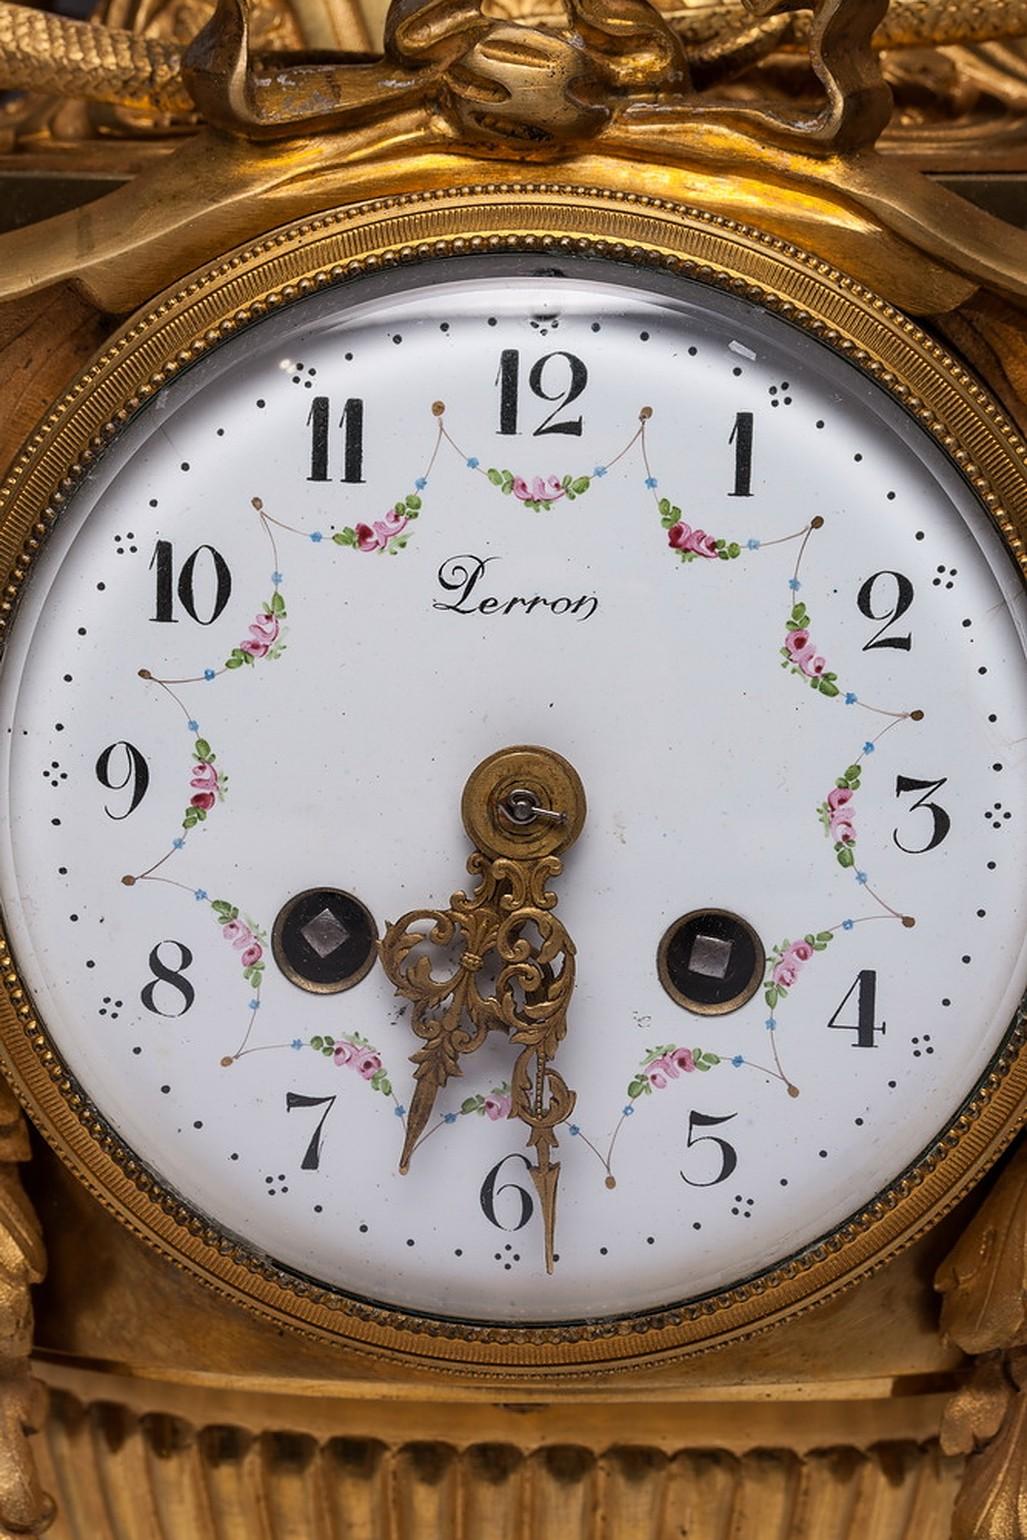 The mantel clock is composed of a circular, white enamel dial, featuring Arabic Numerals, set within a vase-form case. The clock is on an oval base which is on four legs. The mechanism is located on top of a column souraunded a laurel garland. A